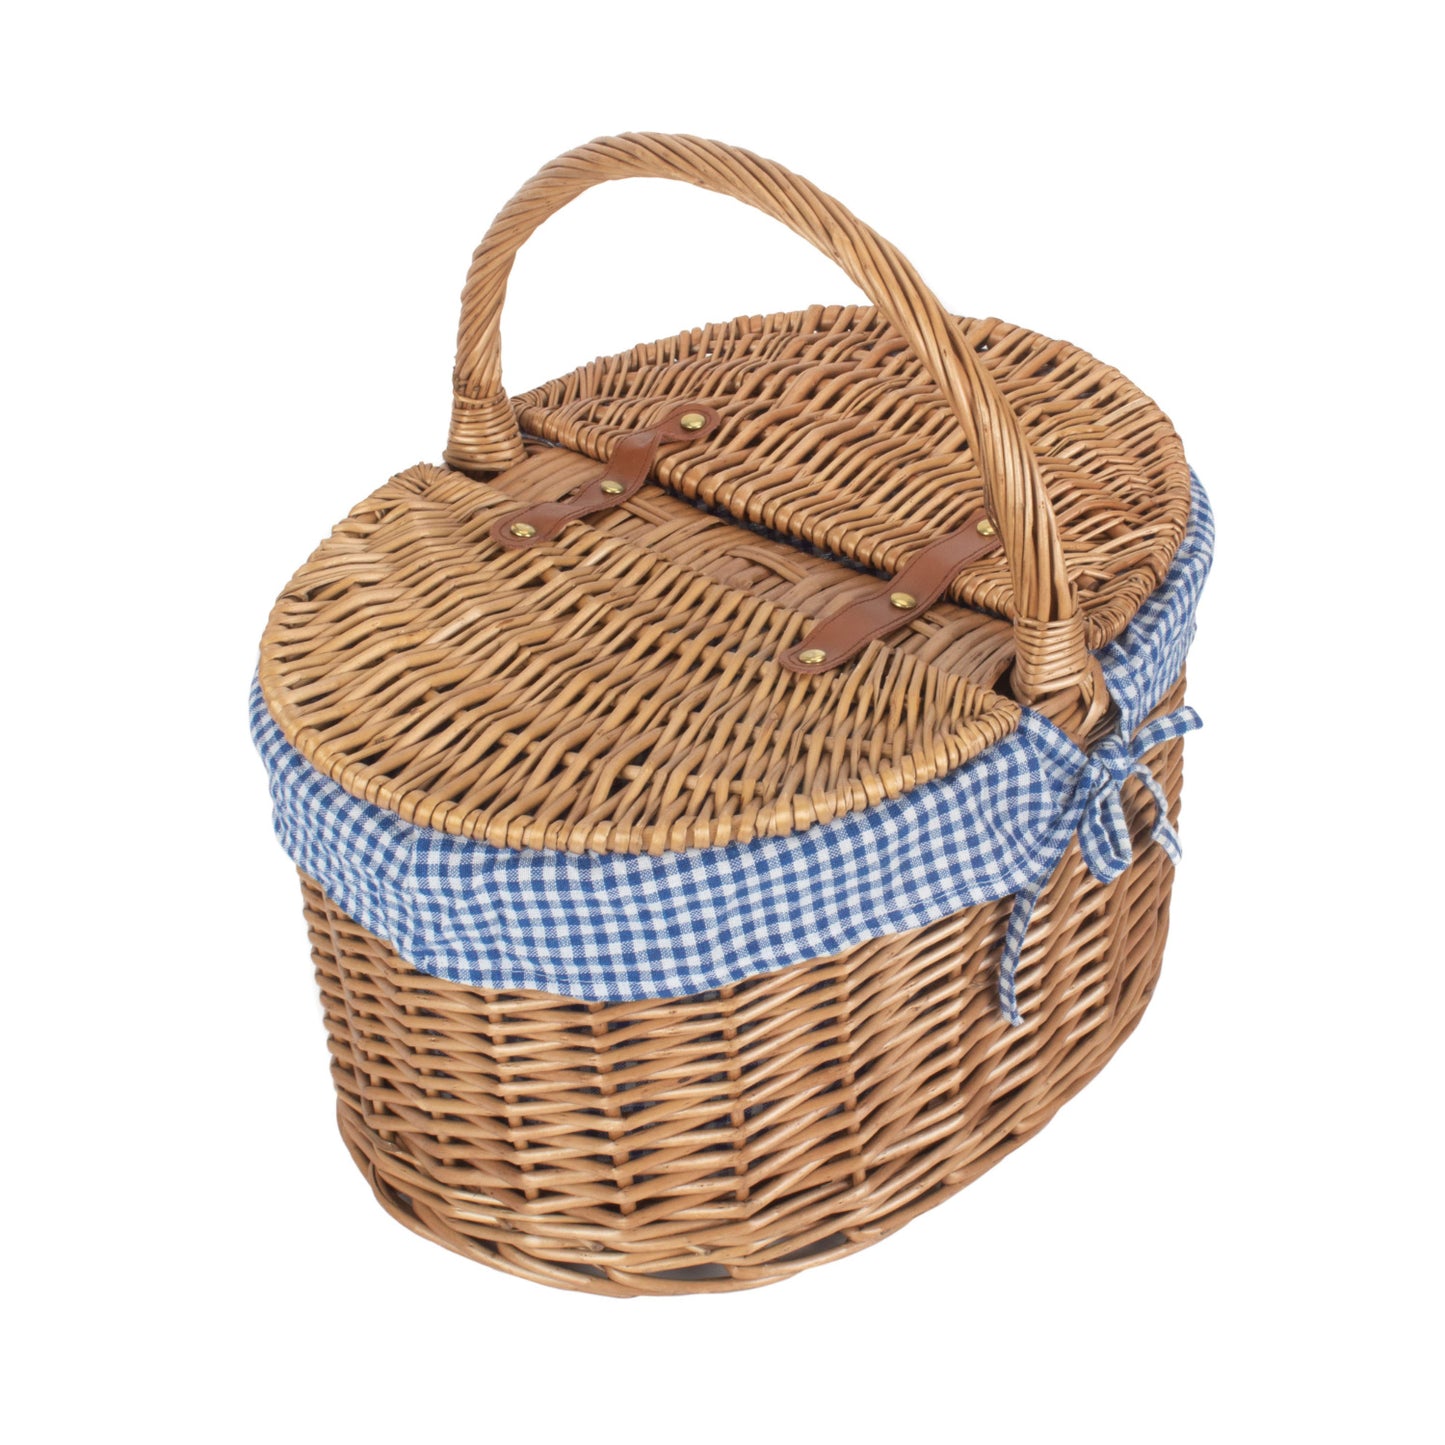 Light Steamed Oval Lidded Hamper With Blue & White Checked Lining